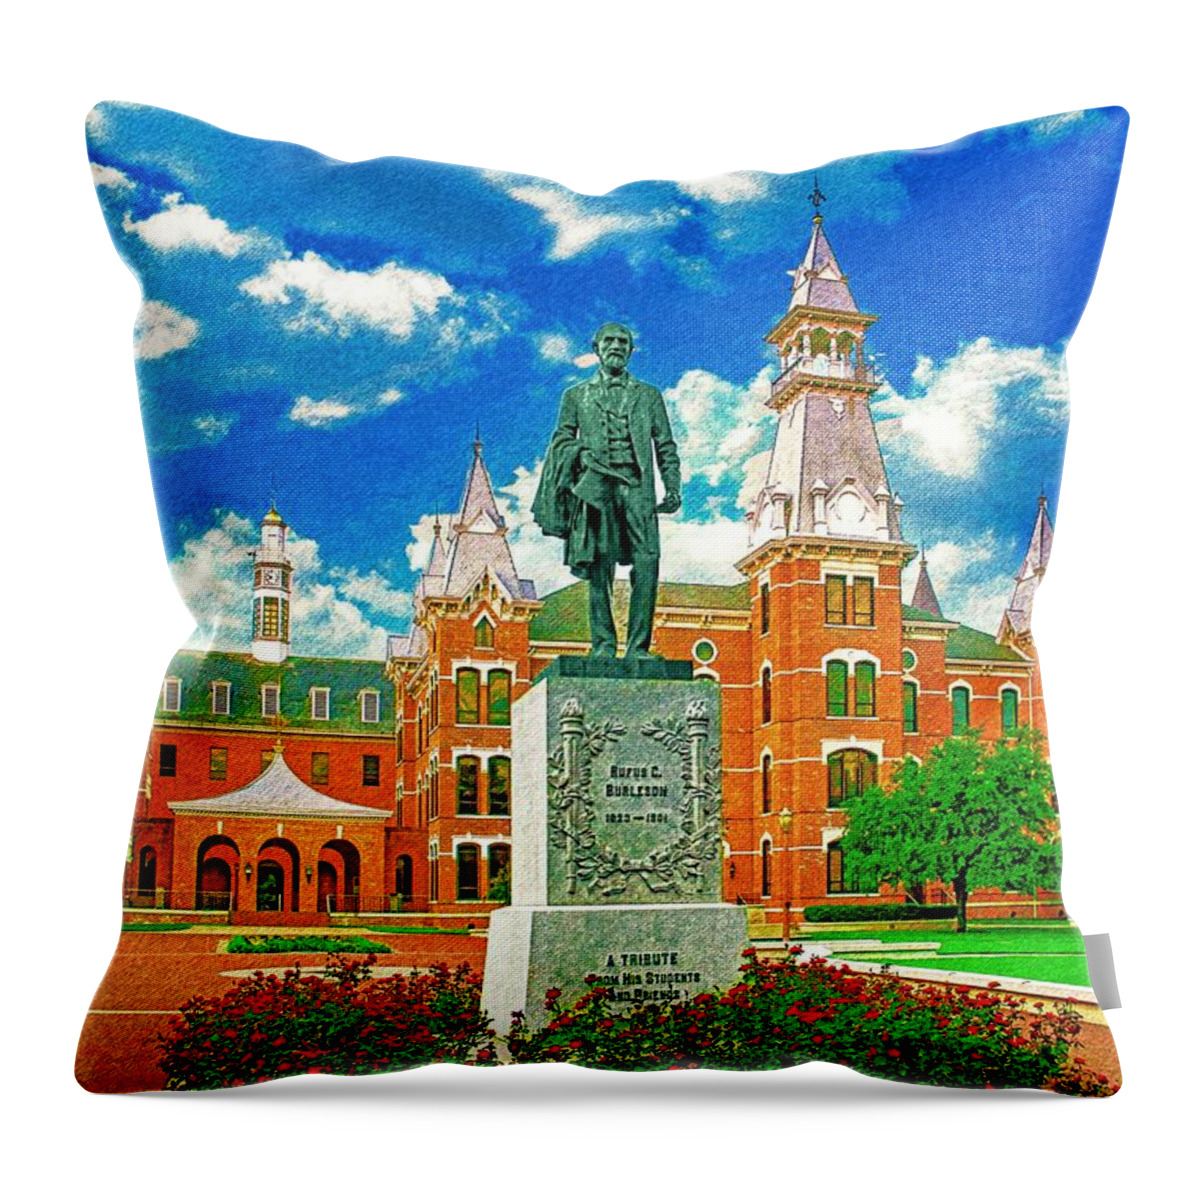 Burleson Quadrangle Throw Pillow featuring the digital art Burleson Quadrangle of the Baylor University in Waco, Texas - pencil sketch by Nicko Prints